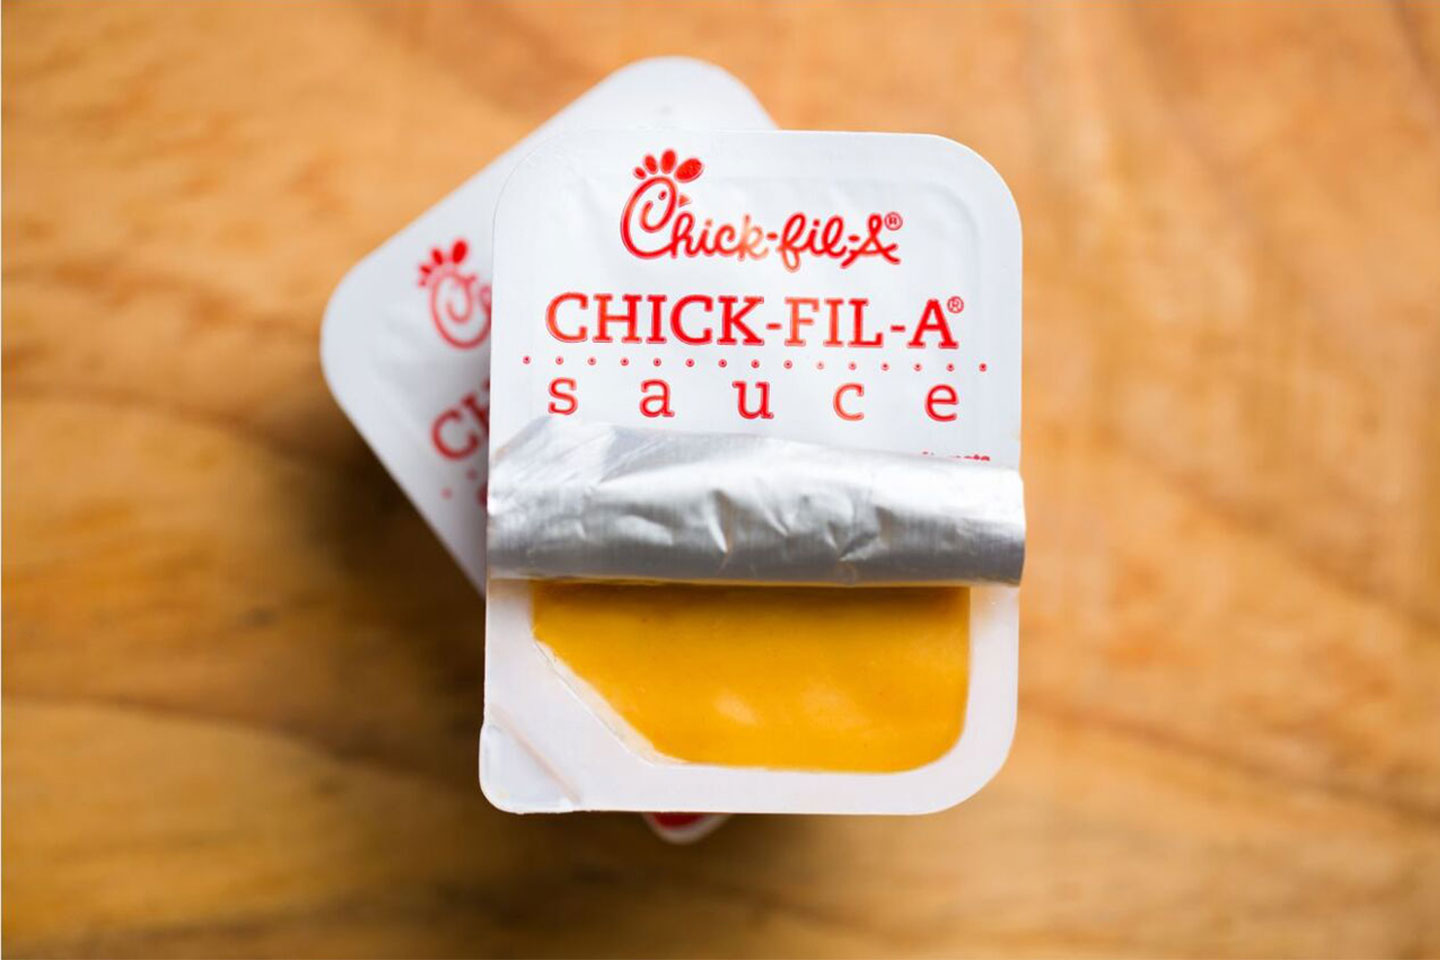 Where to buy Chick-Fil-A sauce